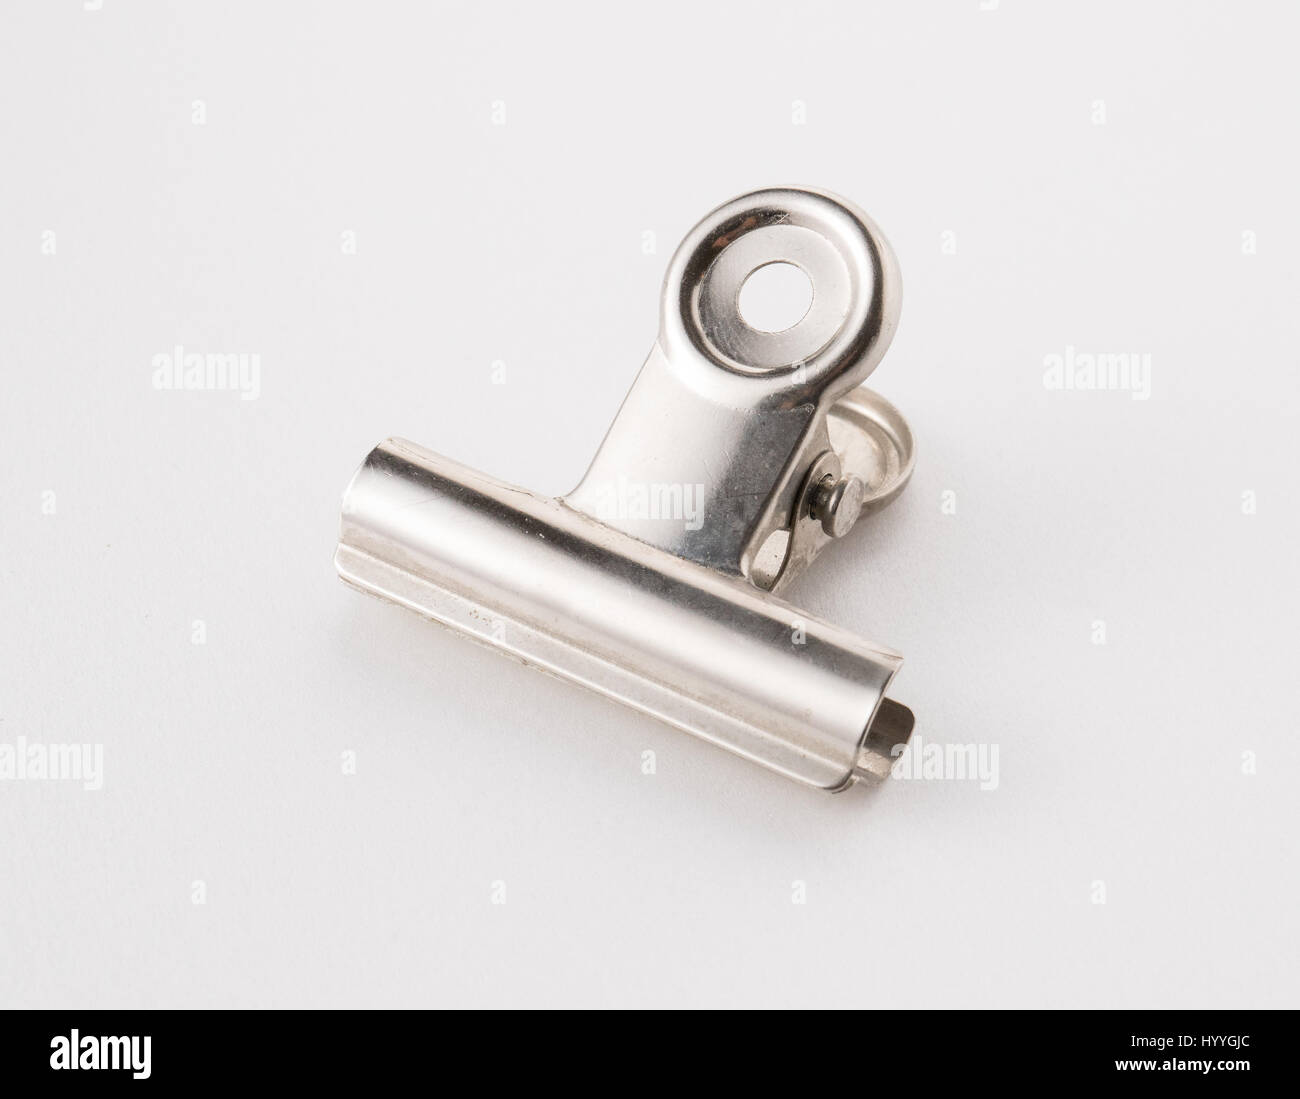 A metal paperclip on a white background. Stock Photo